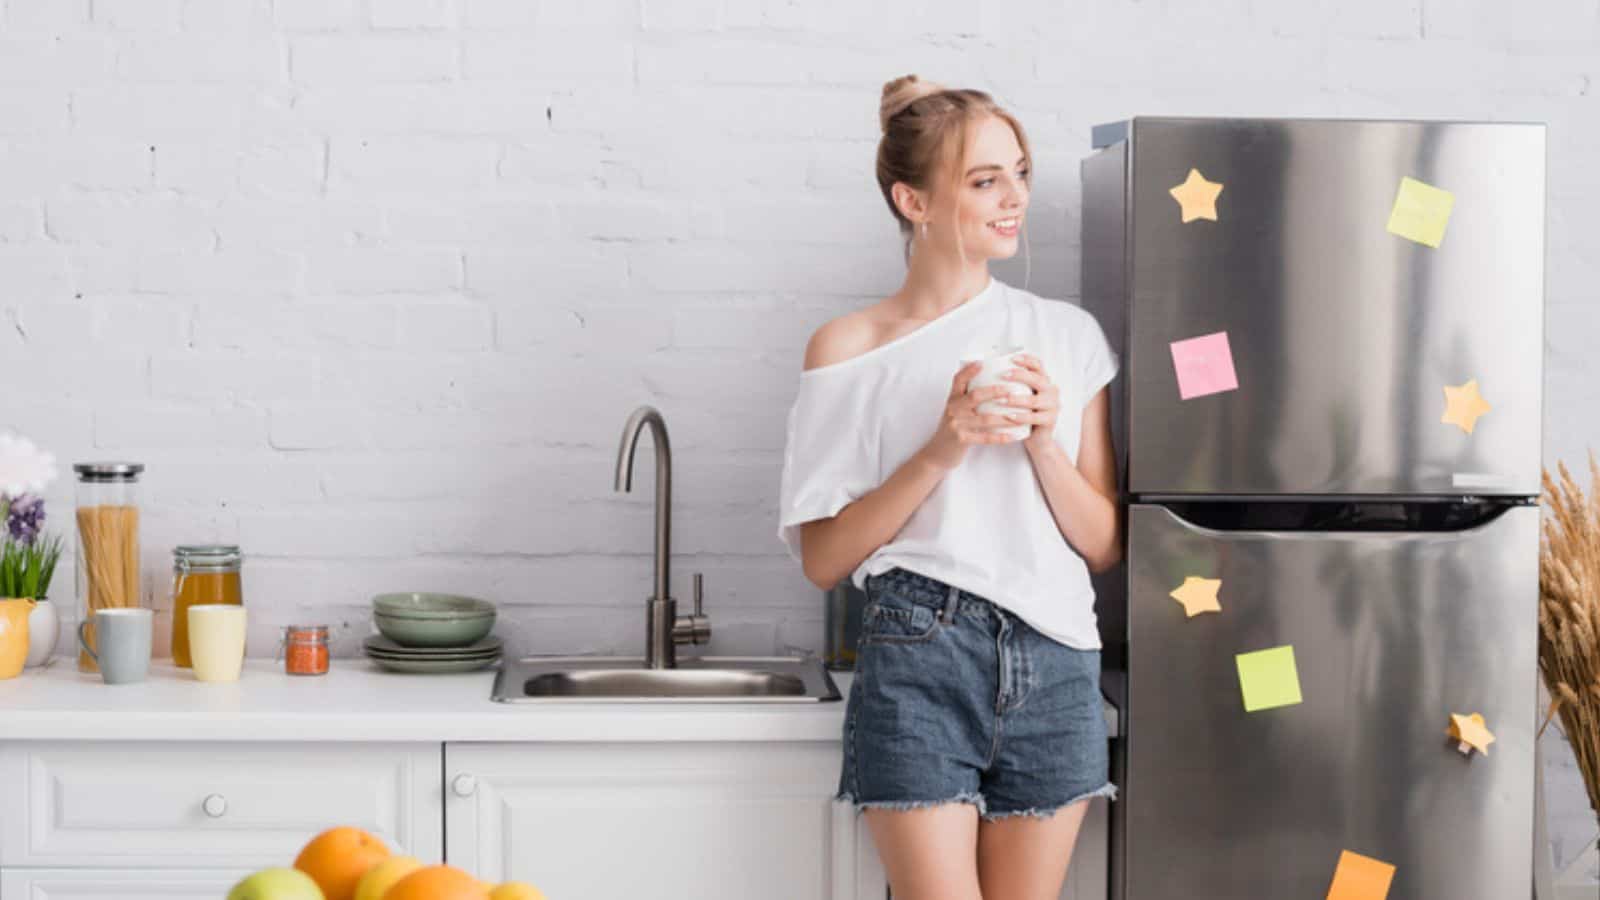 Selective focus of young blonde woman in white t-shirt and shorts holding cup while standing in kitchen